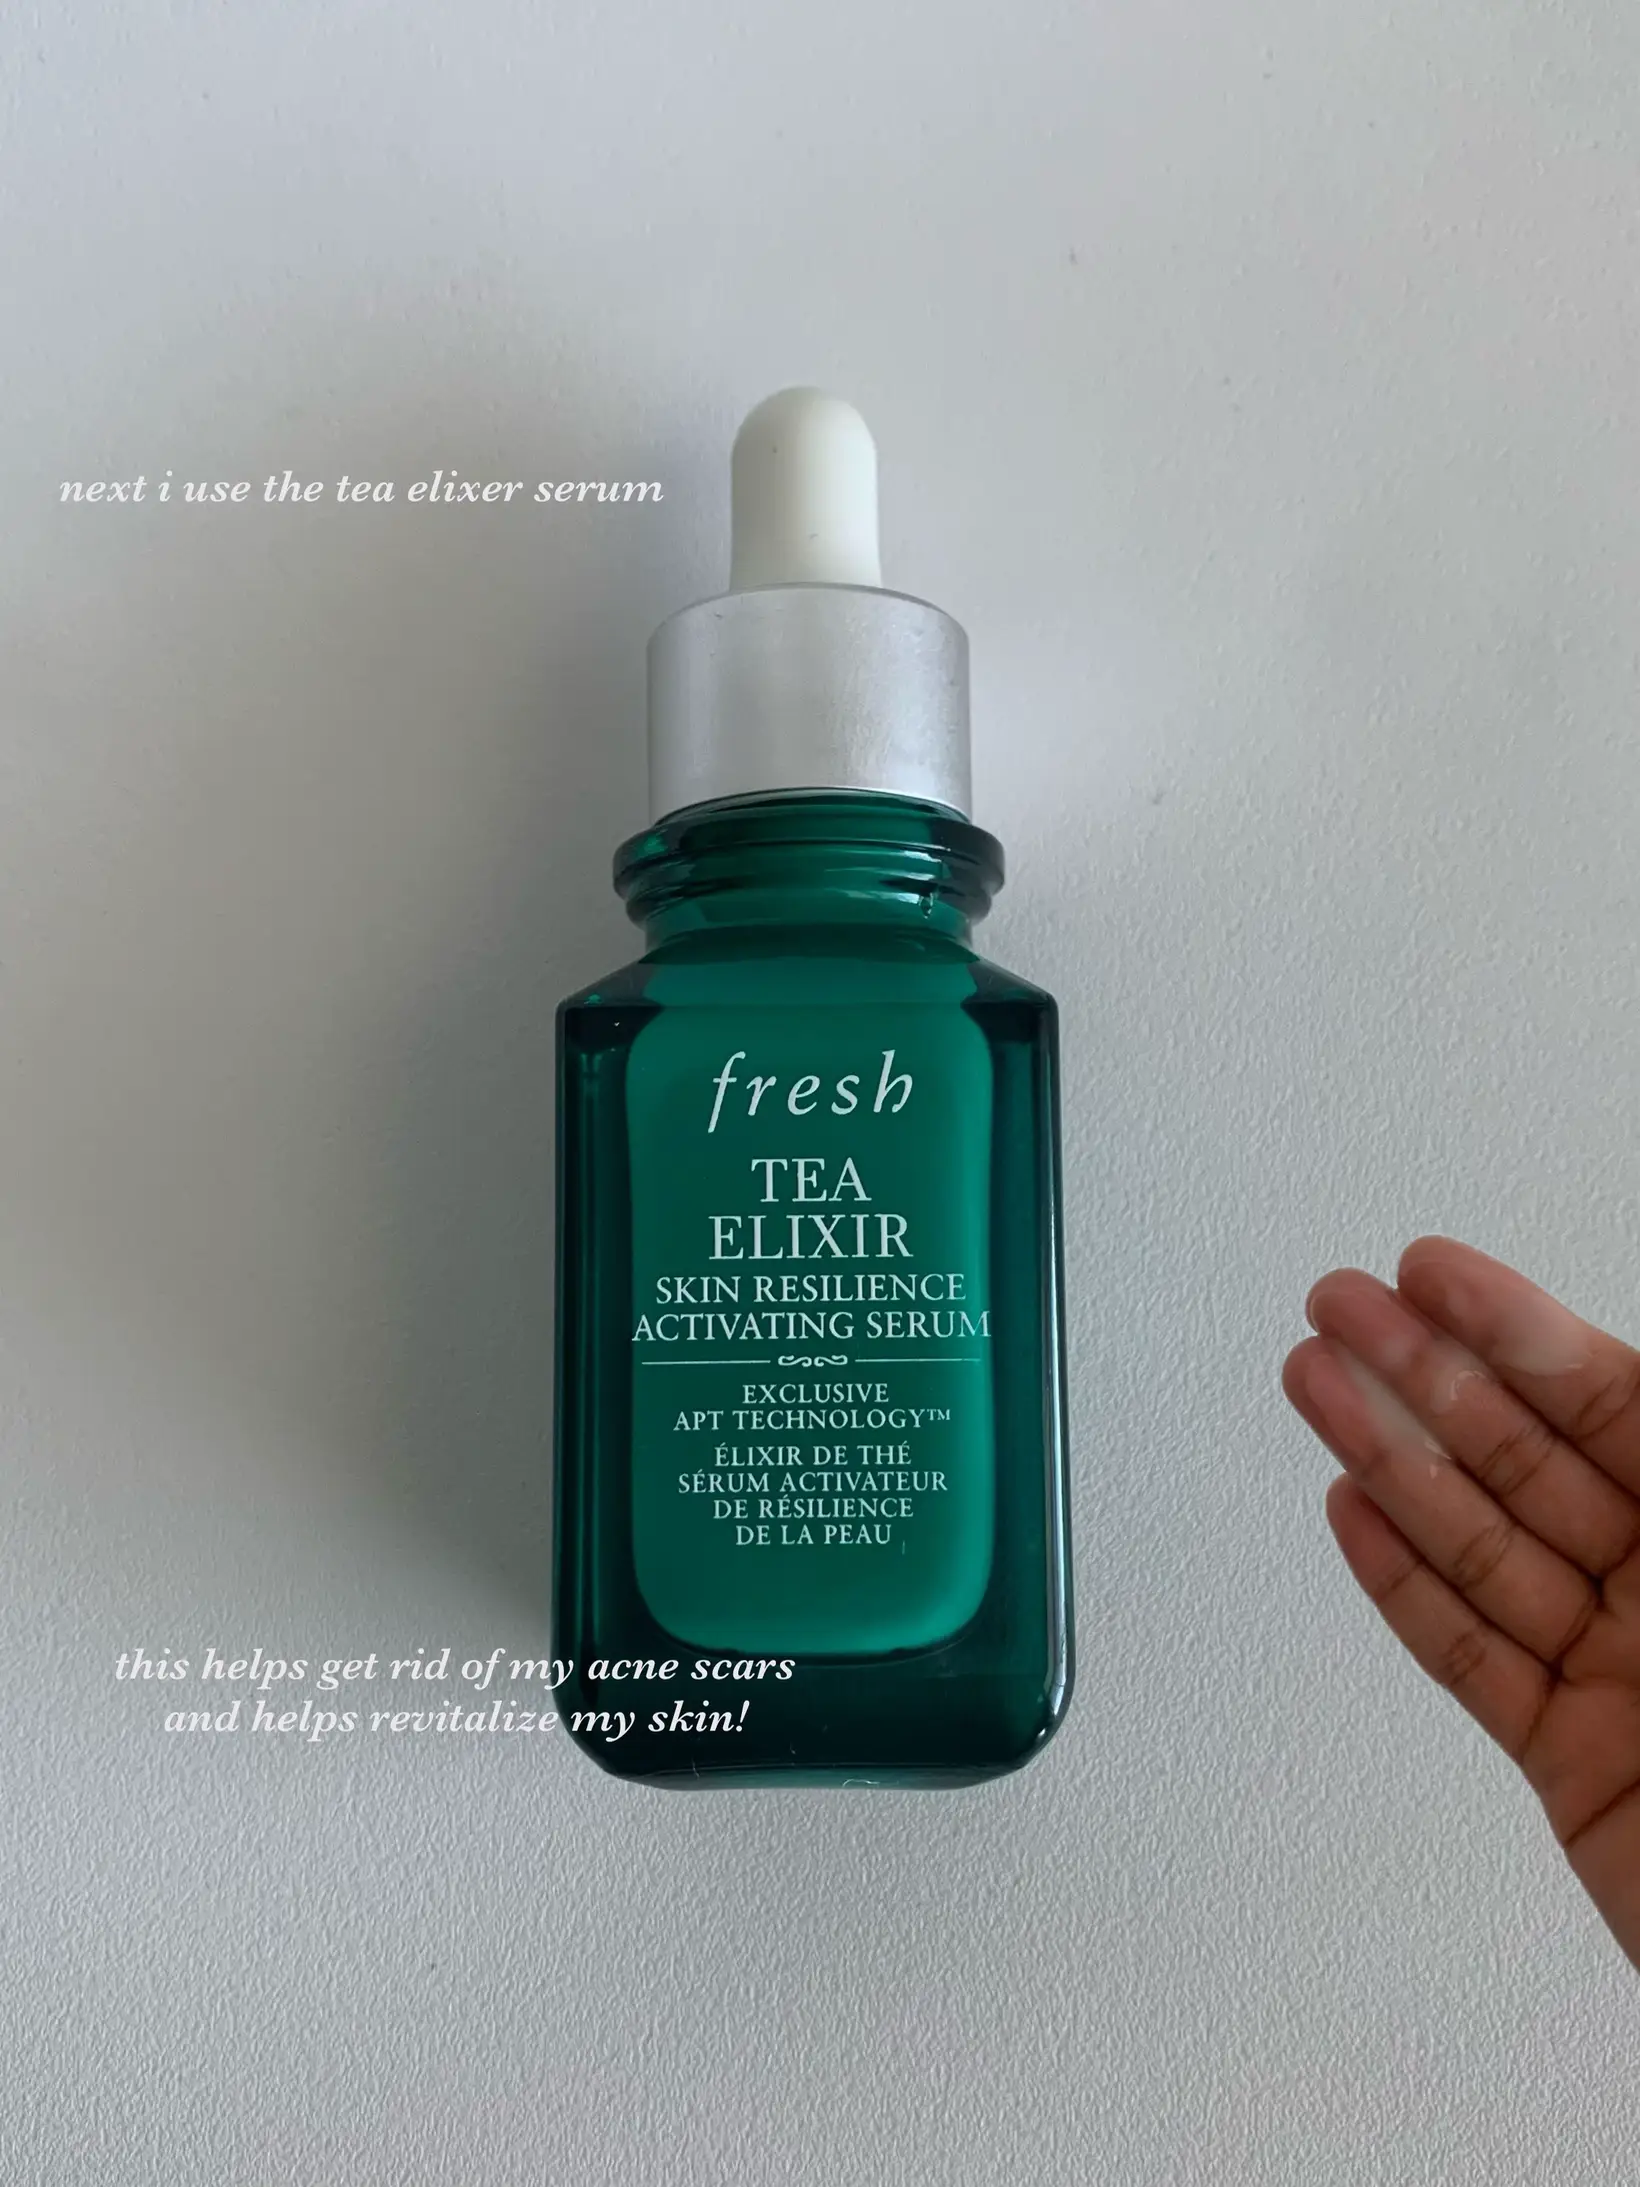 I Regret Trying the New Fresh Tea Elixir Serum Because I Ended Up